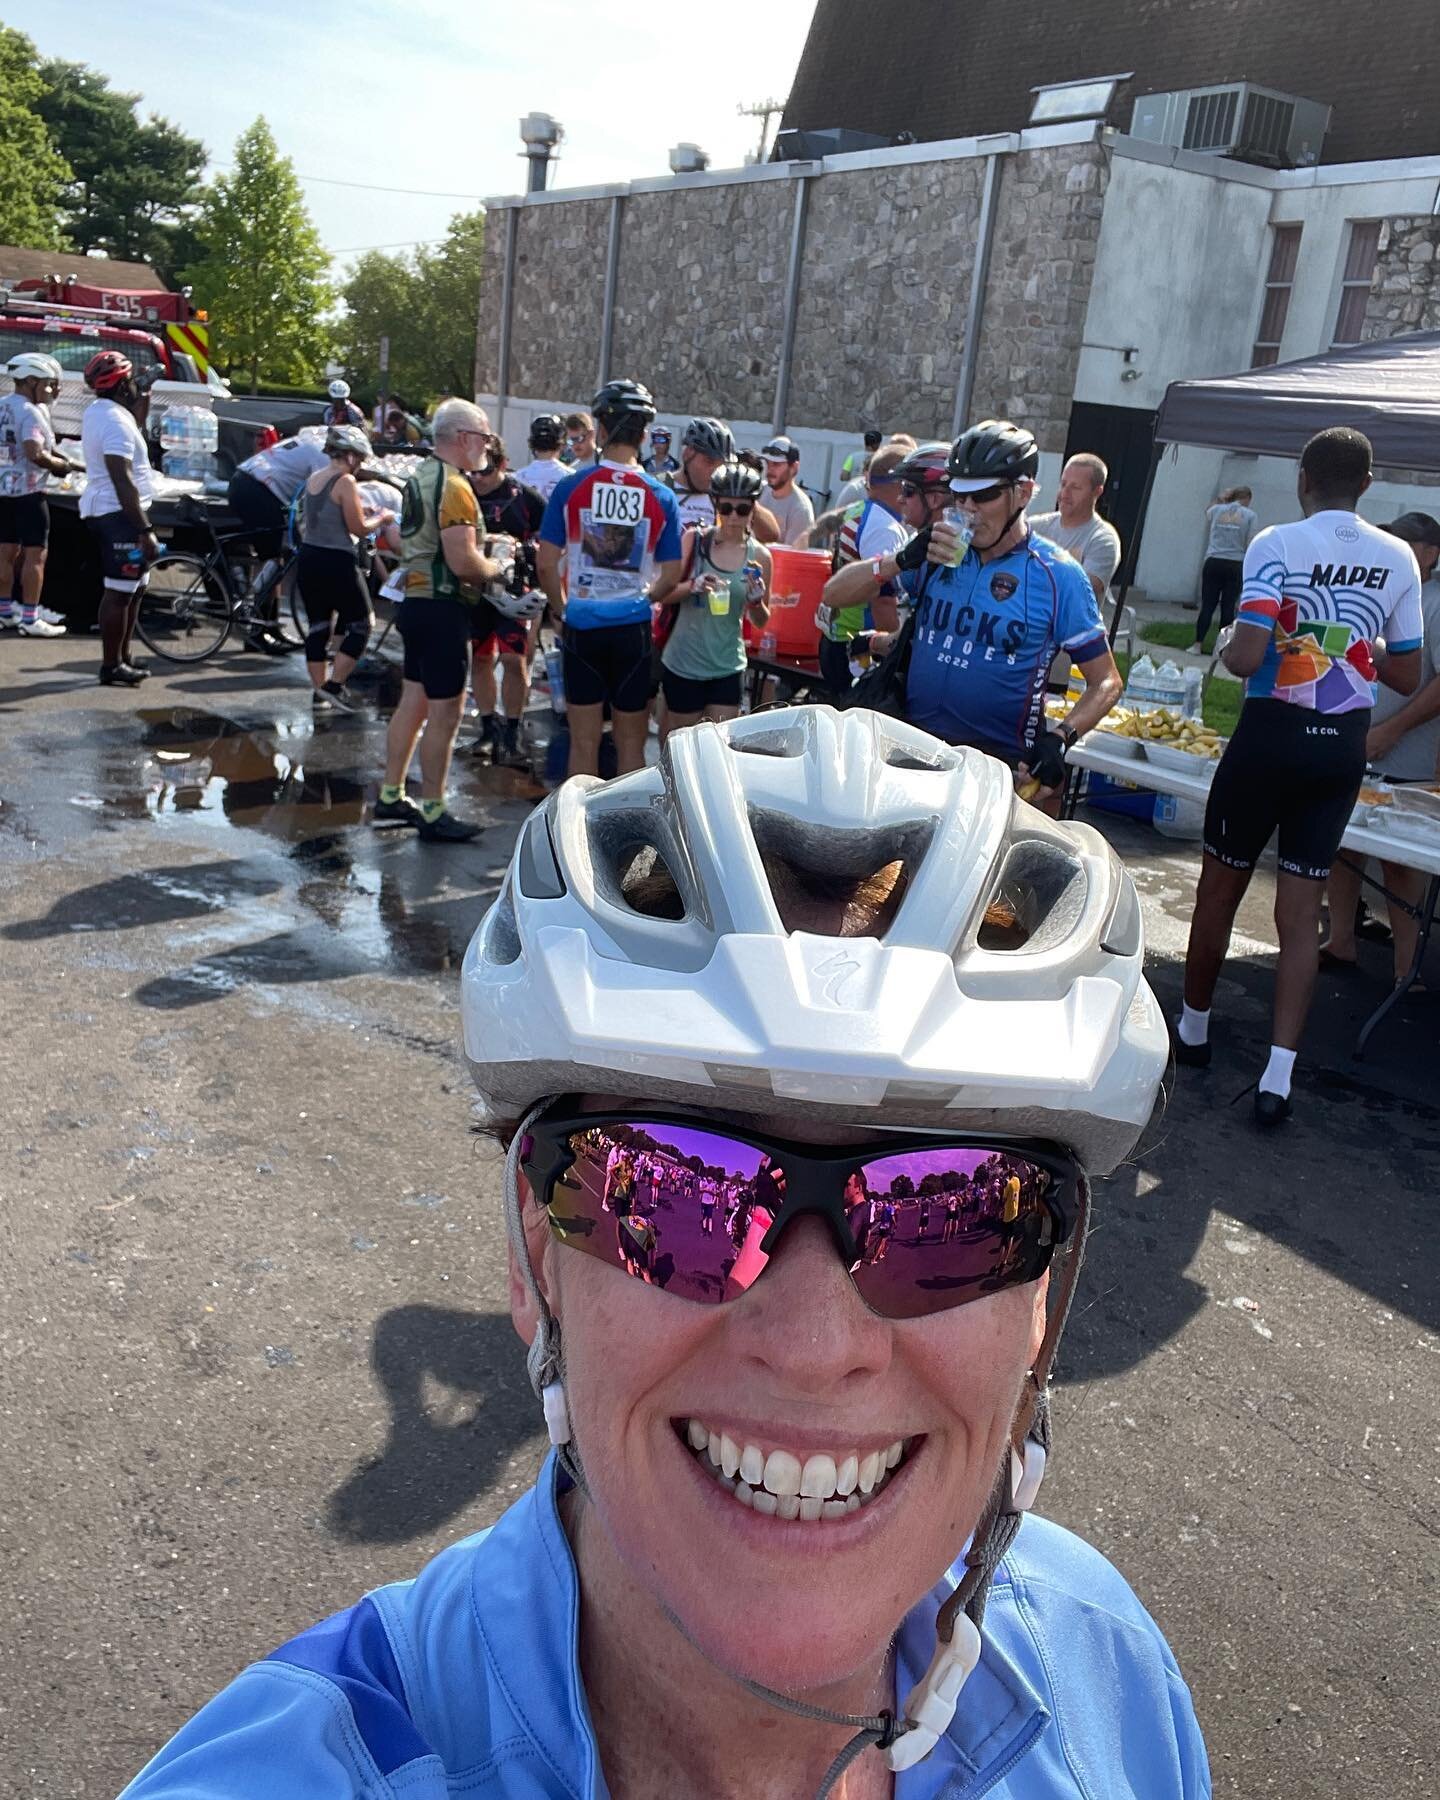 Roughly halfway there and beatin&rsquo; the heat! Great ride so far for a great cause. Thanks to amazing volunteers! 
🚴&zwj;♀️🚴🚴&zwj;♂️.
.
.
.
. #bentotheshore #familiesbehindthebadge #getmoving